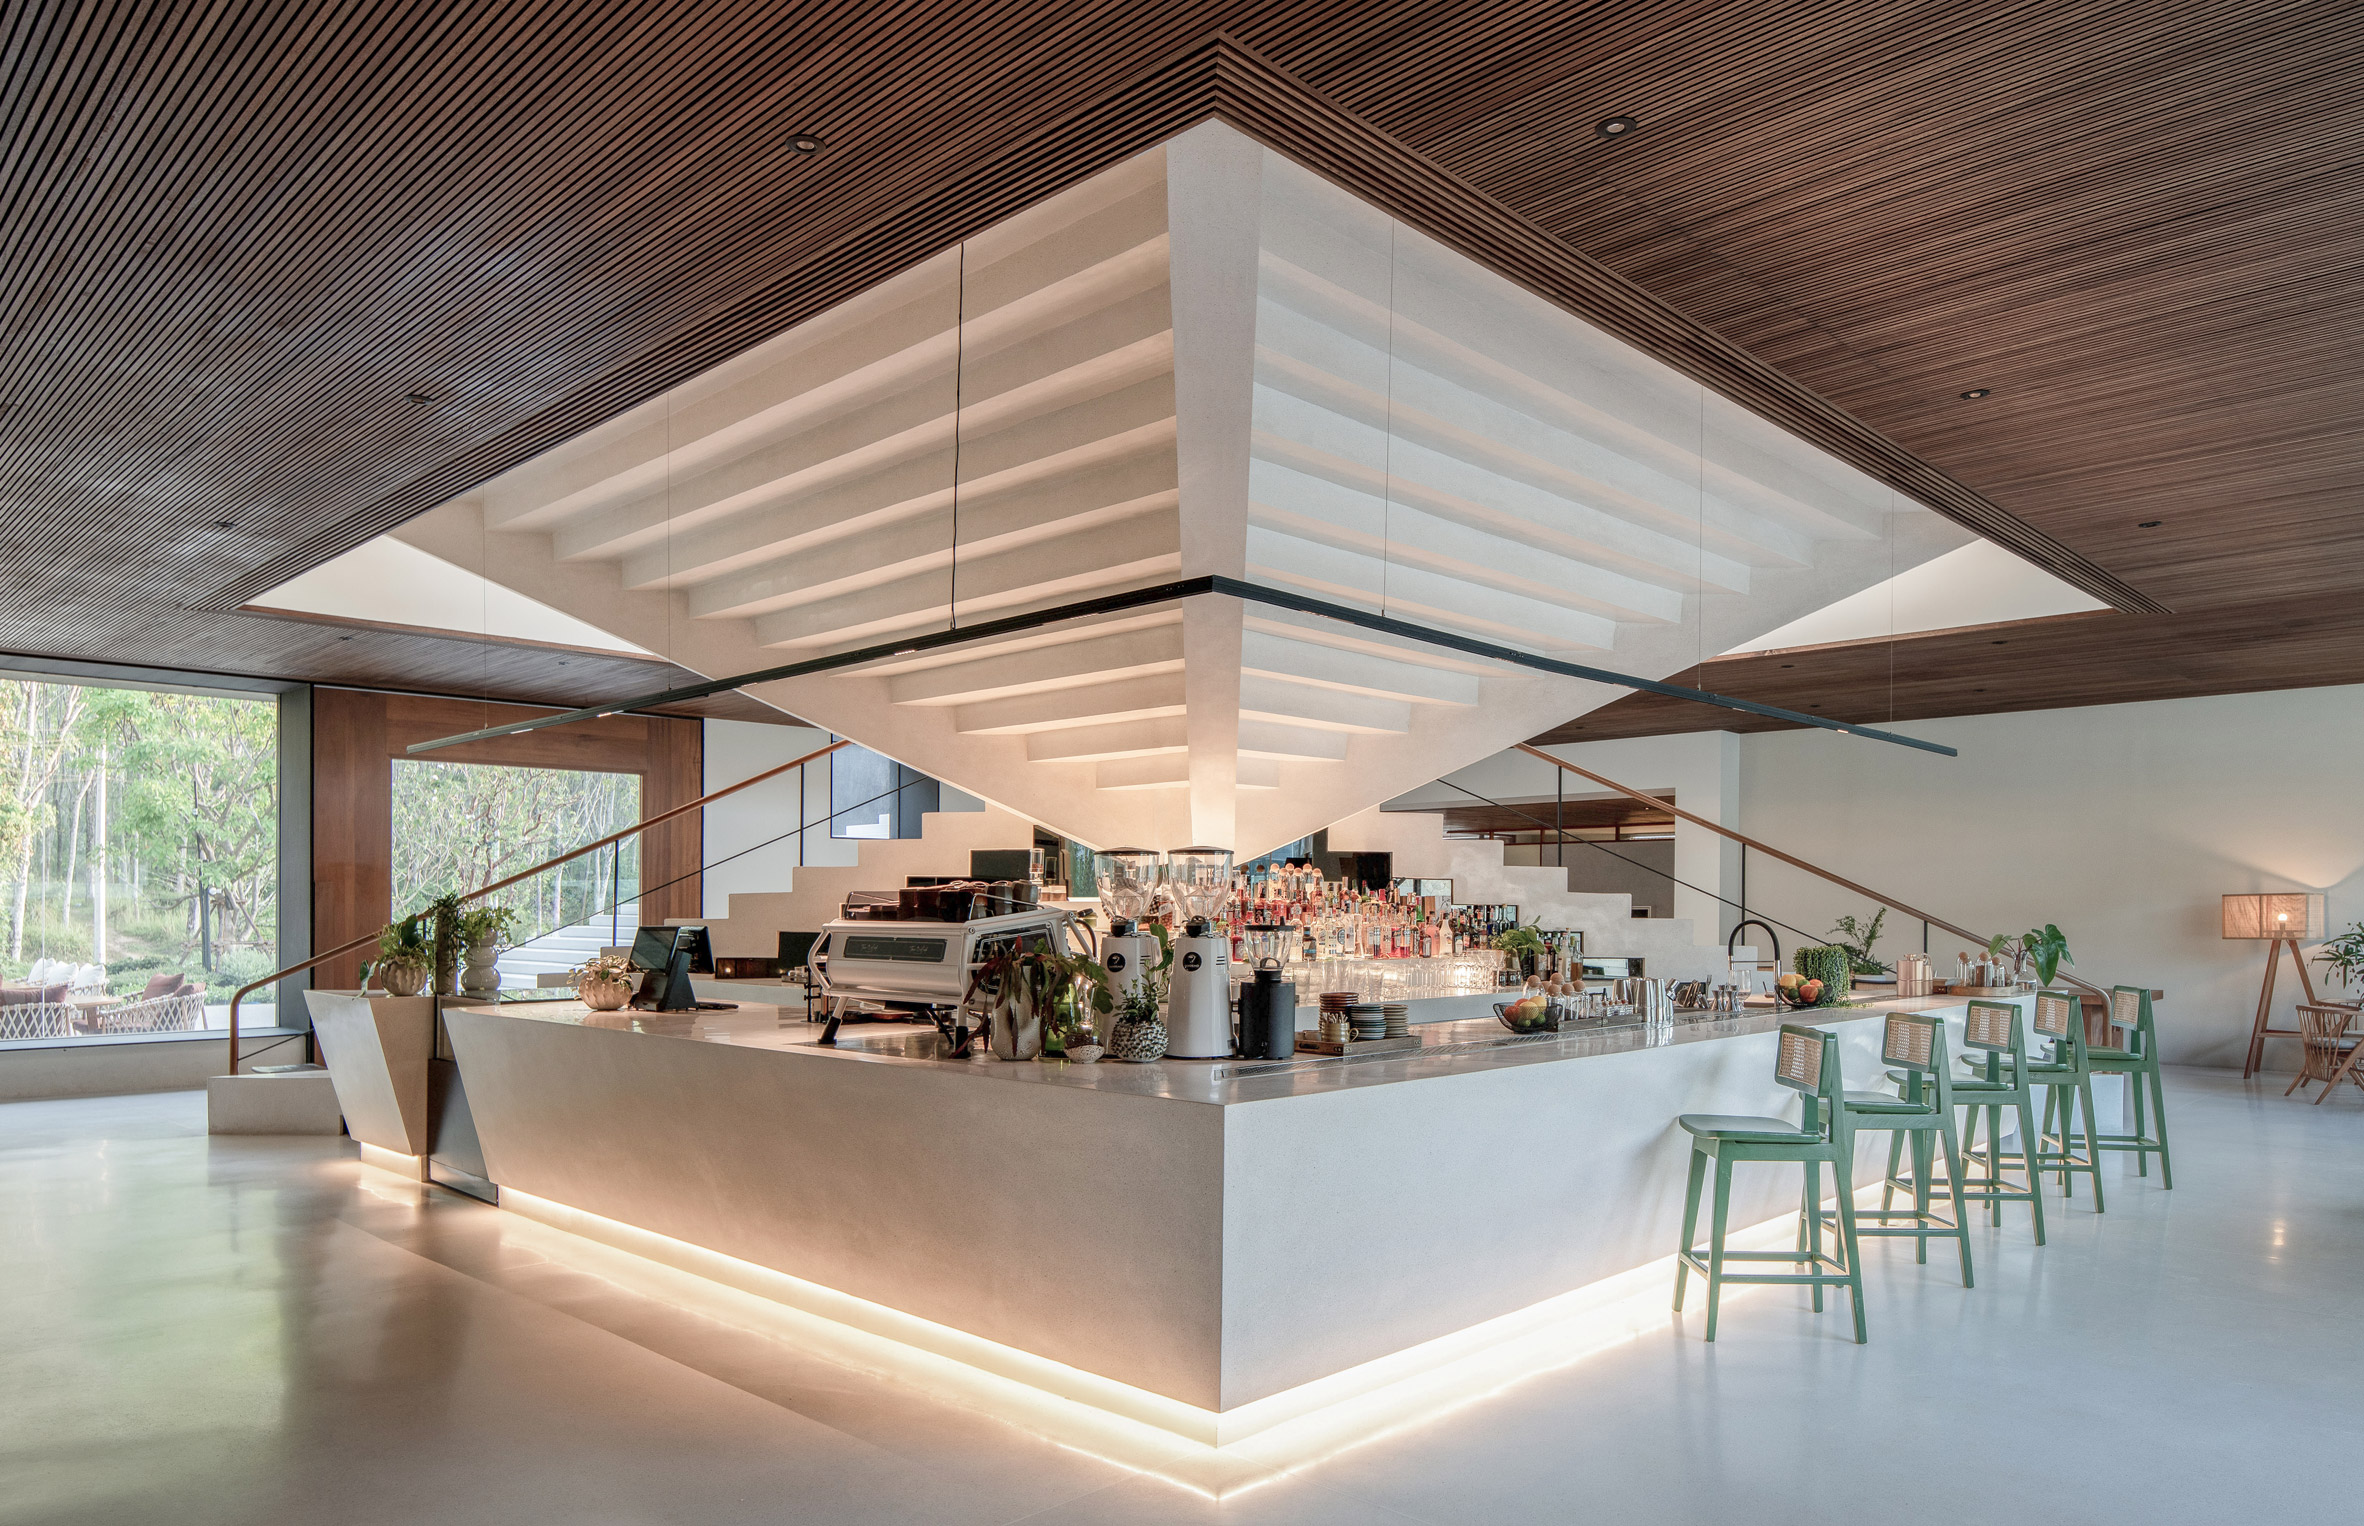 Cafe in the Tree O'Clock community centre in Thailand by Studio Locomotive